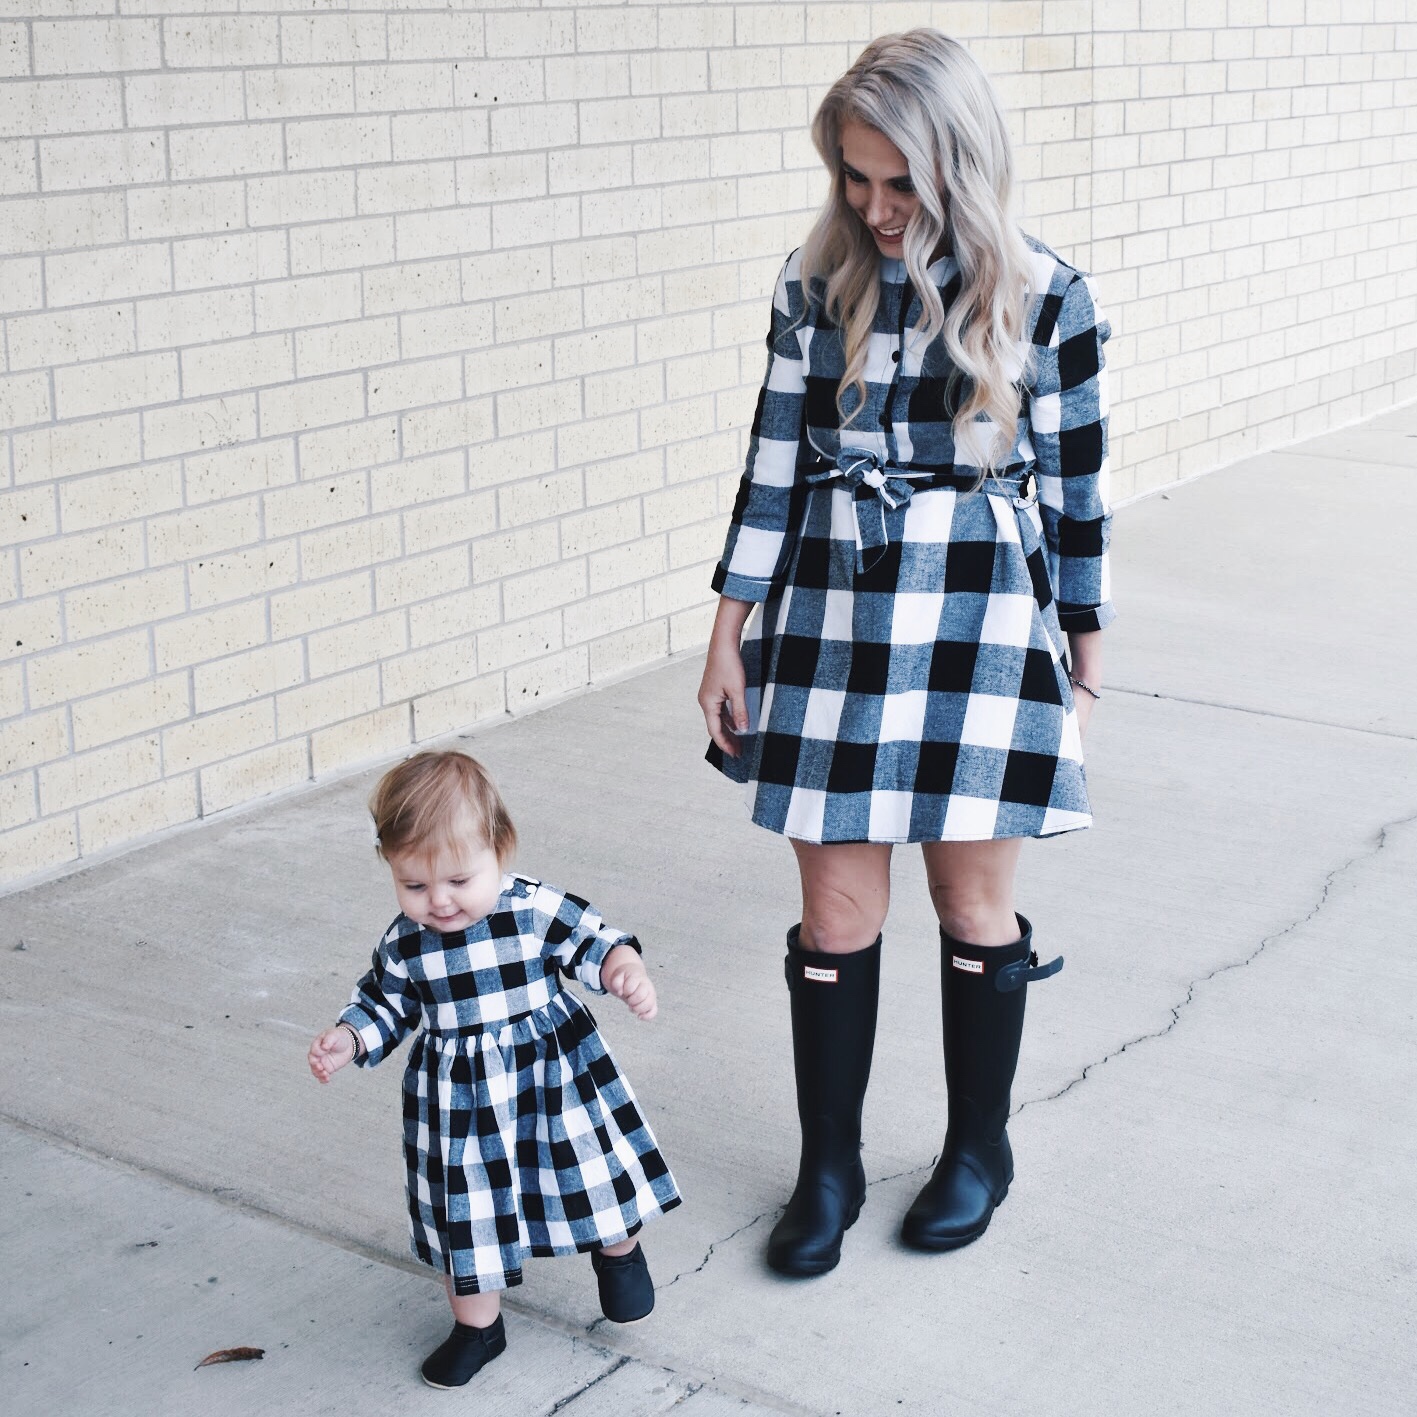 Mommy and Me Dresses - Fall Matching Clothes for Mommy and Daughter. These Mommy and Me plaid dresses are perfect for twinning with your mini me. Best of all, they're super affordable -- you can get both dresses for around $30 total! Perfect Mommy and Me outfit inspo from fashion blogger Tricia Nibarger of COVET by tricia, showcasing plaid dresses for Mom and Daughter. #MommyandMe #GirlMom #LikeTKit